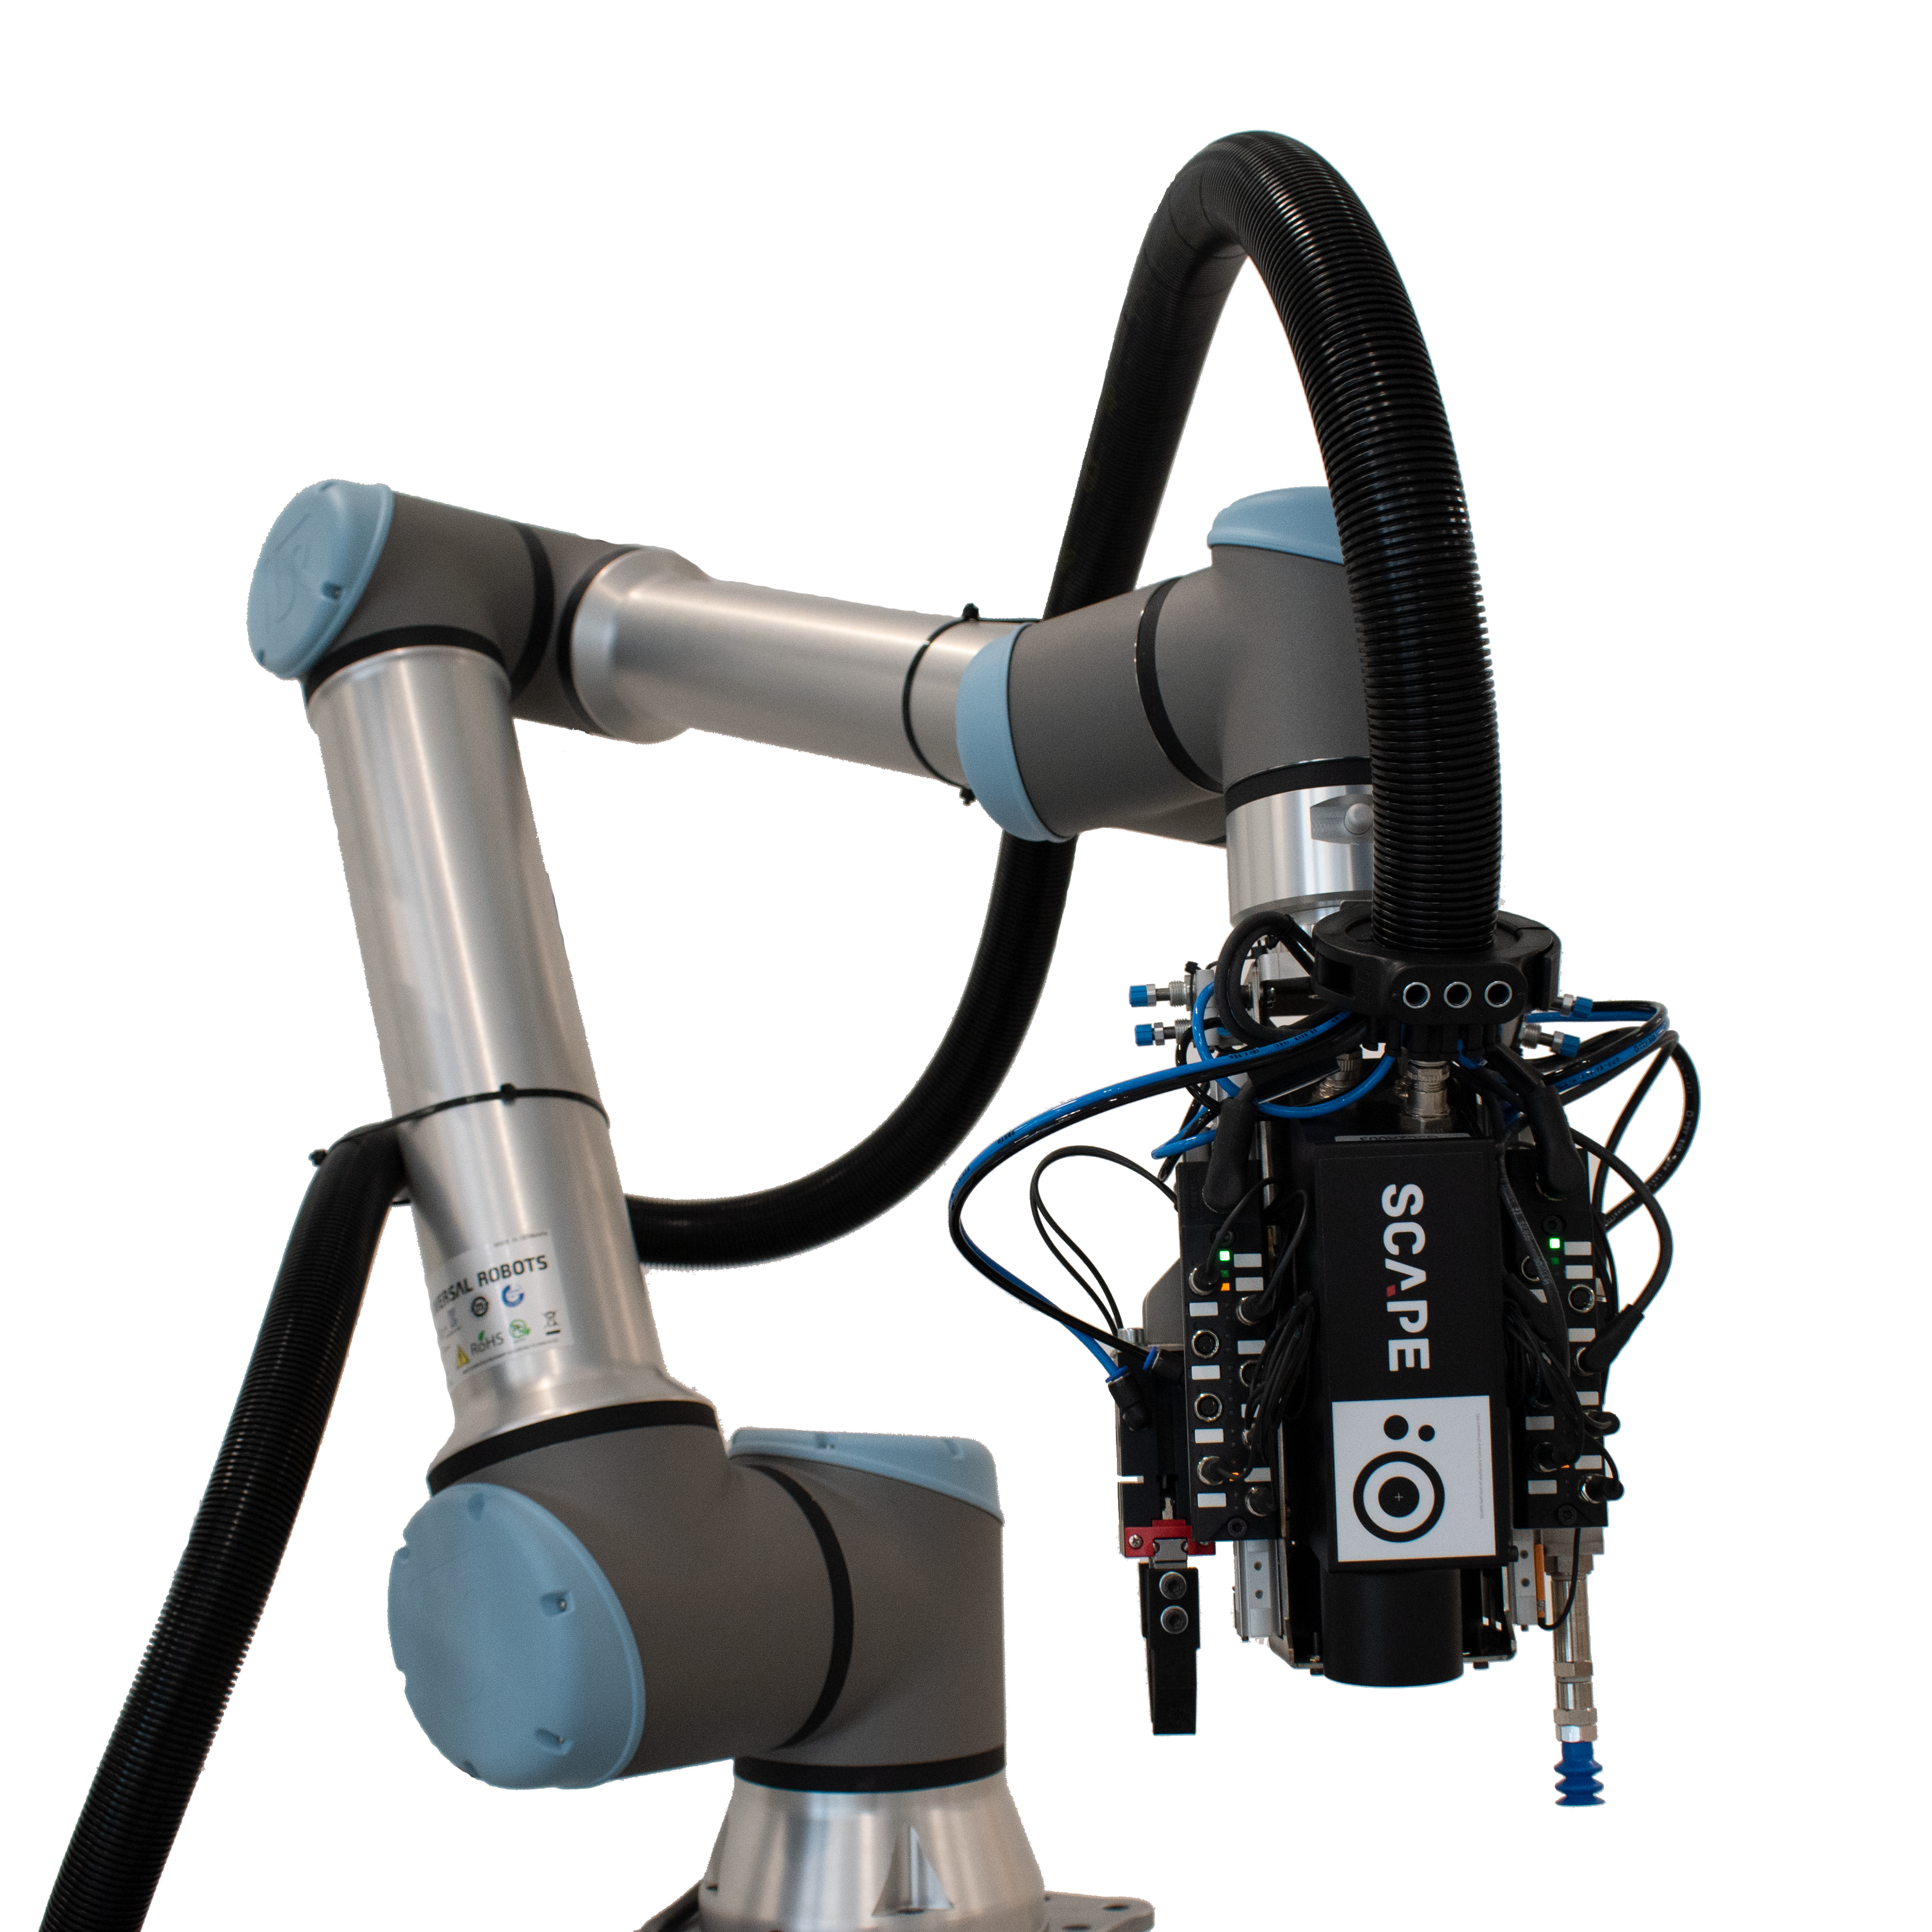 SCAPE Mini-Picker solution for production line automation, integrated on a Universal Robot cobot